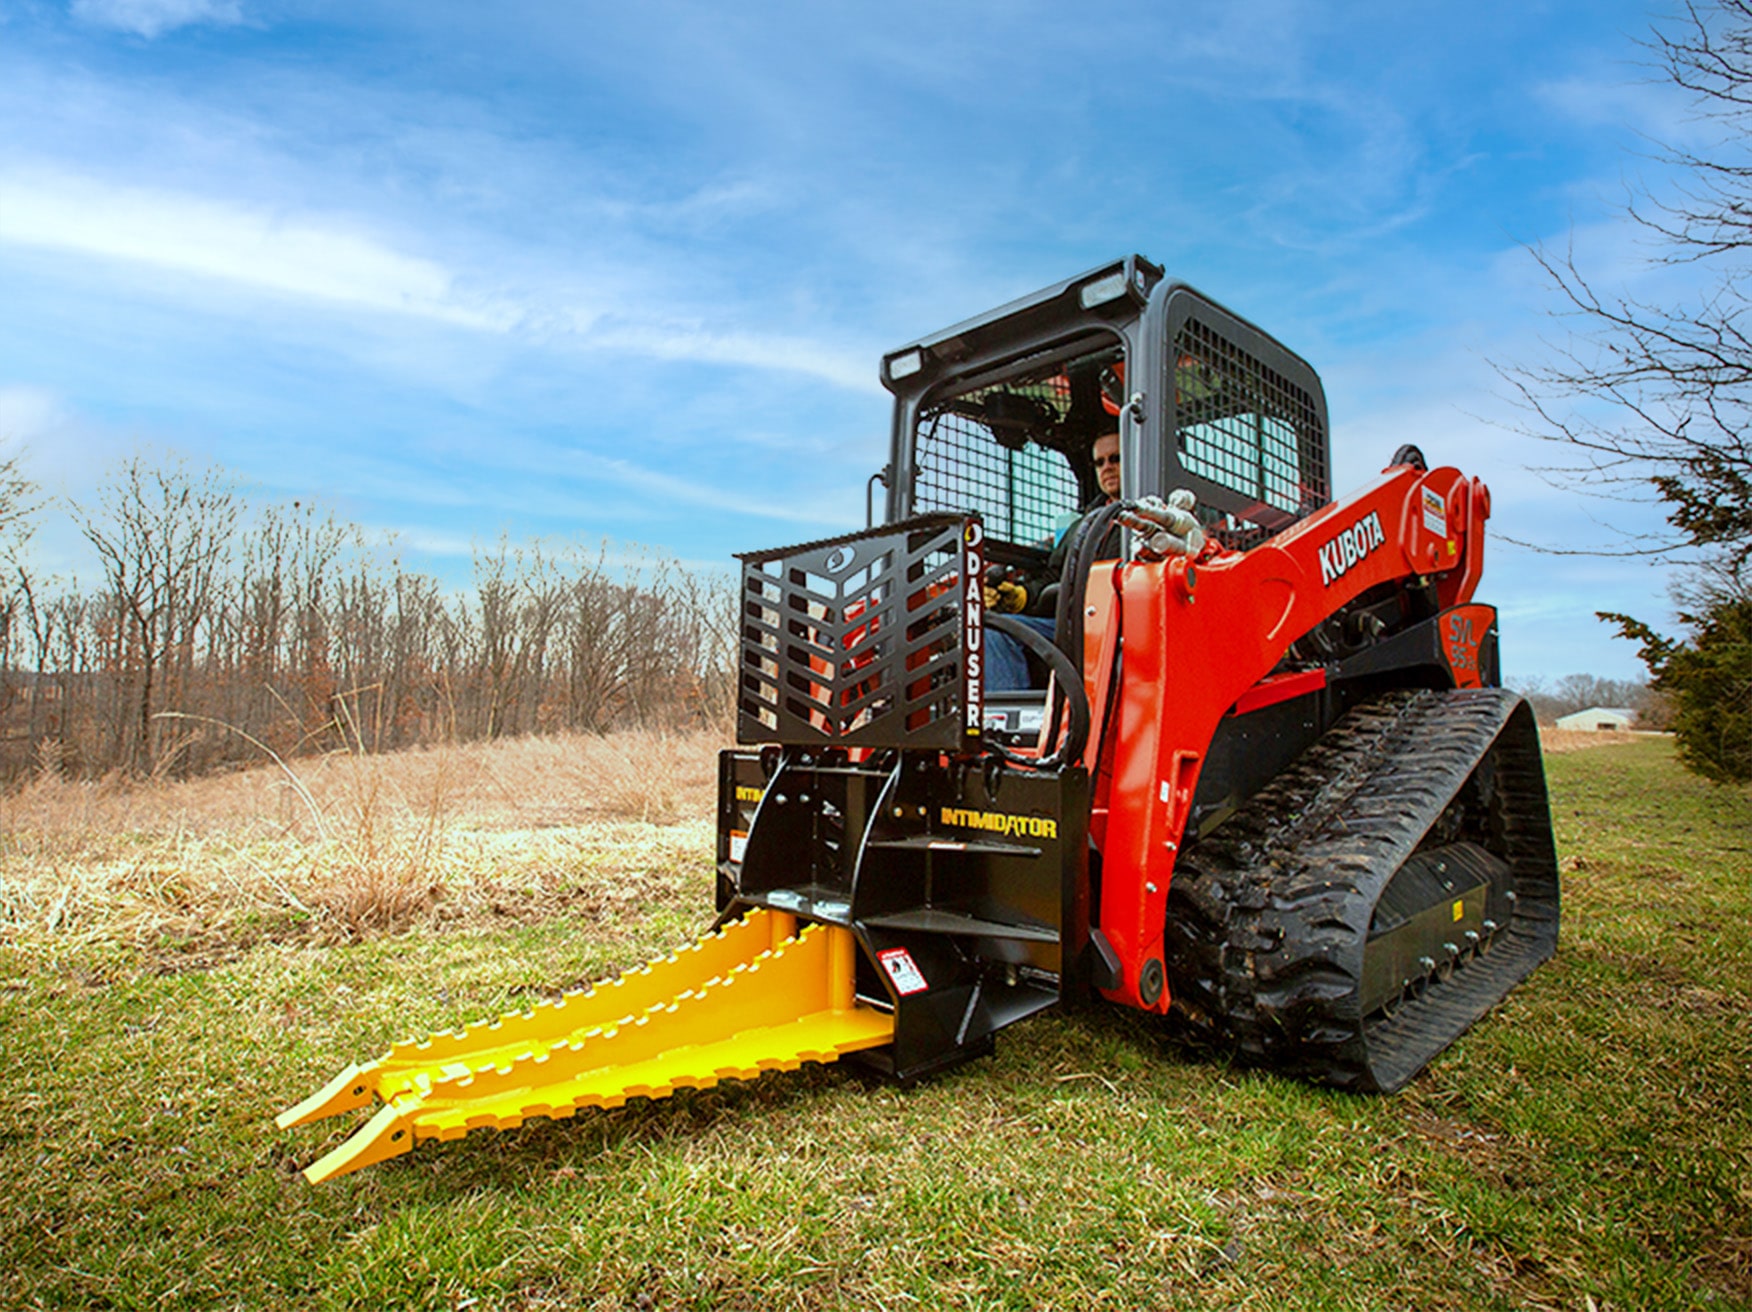 A true land-clearing, obstacle-removing attachment for your skid-steer or tractor